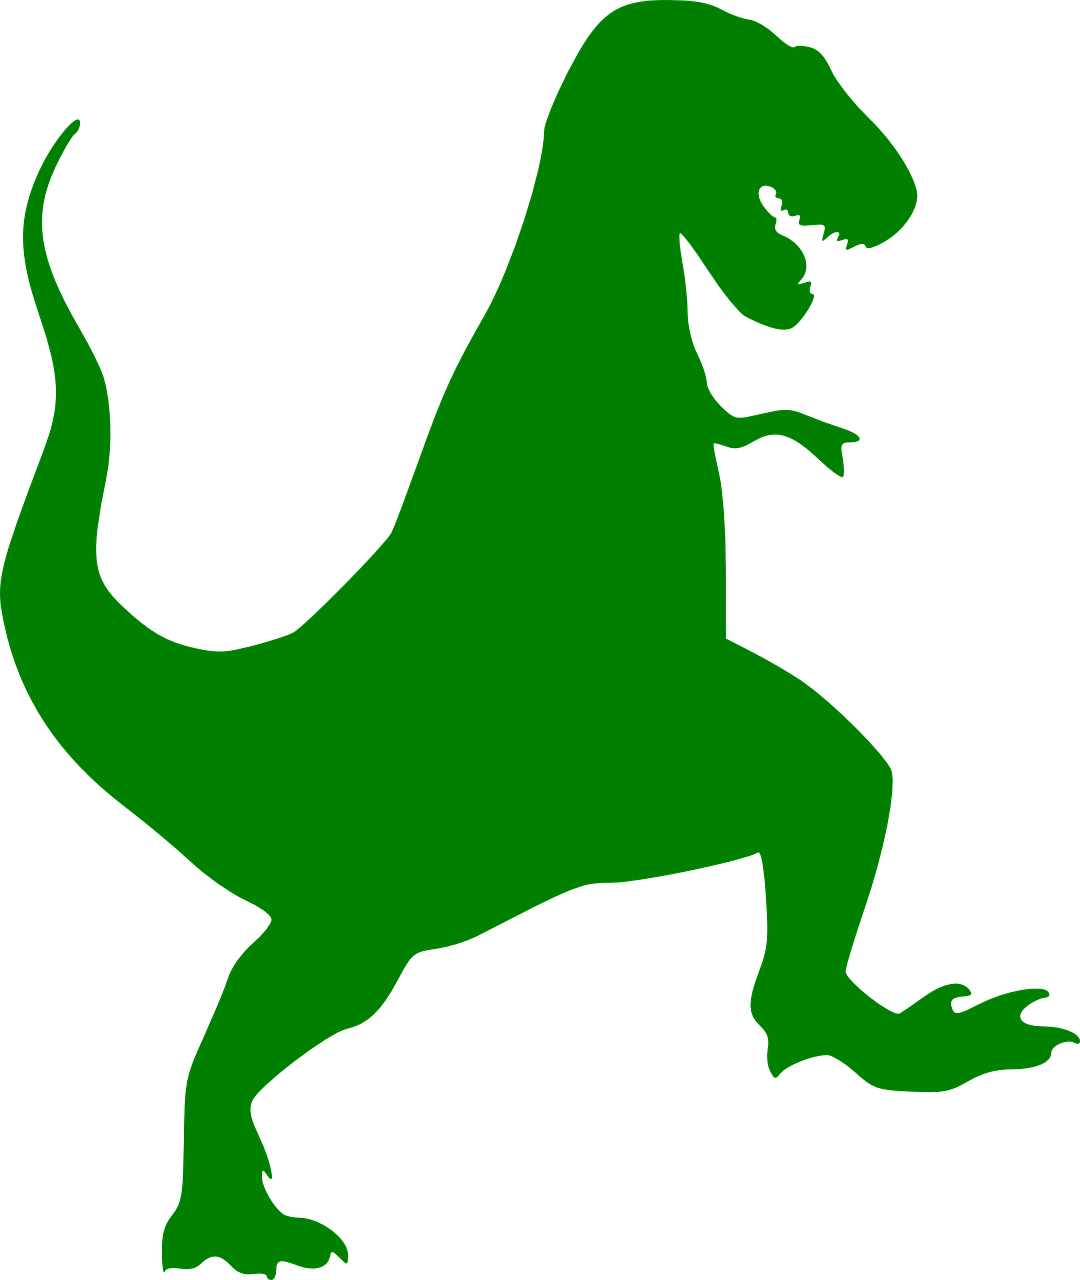 a green t - rex silhouetted against a black background, inspired by Adam Rex, rating:g, 1285445247], uncompressed png, it\'s name is greeny